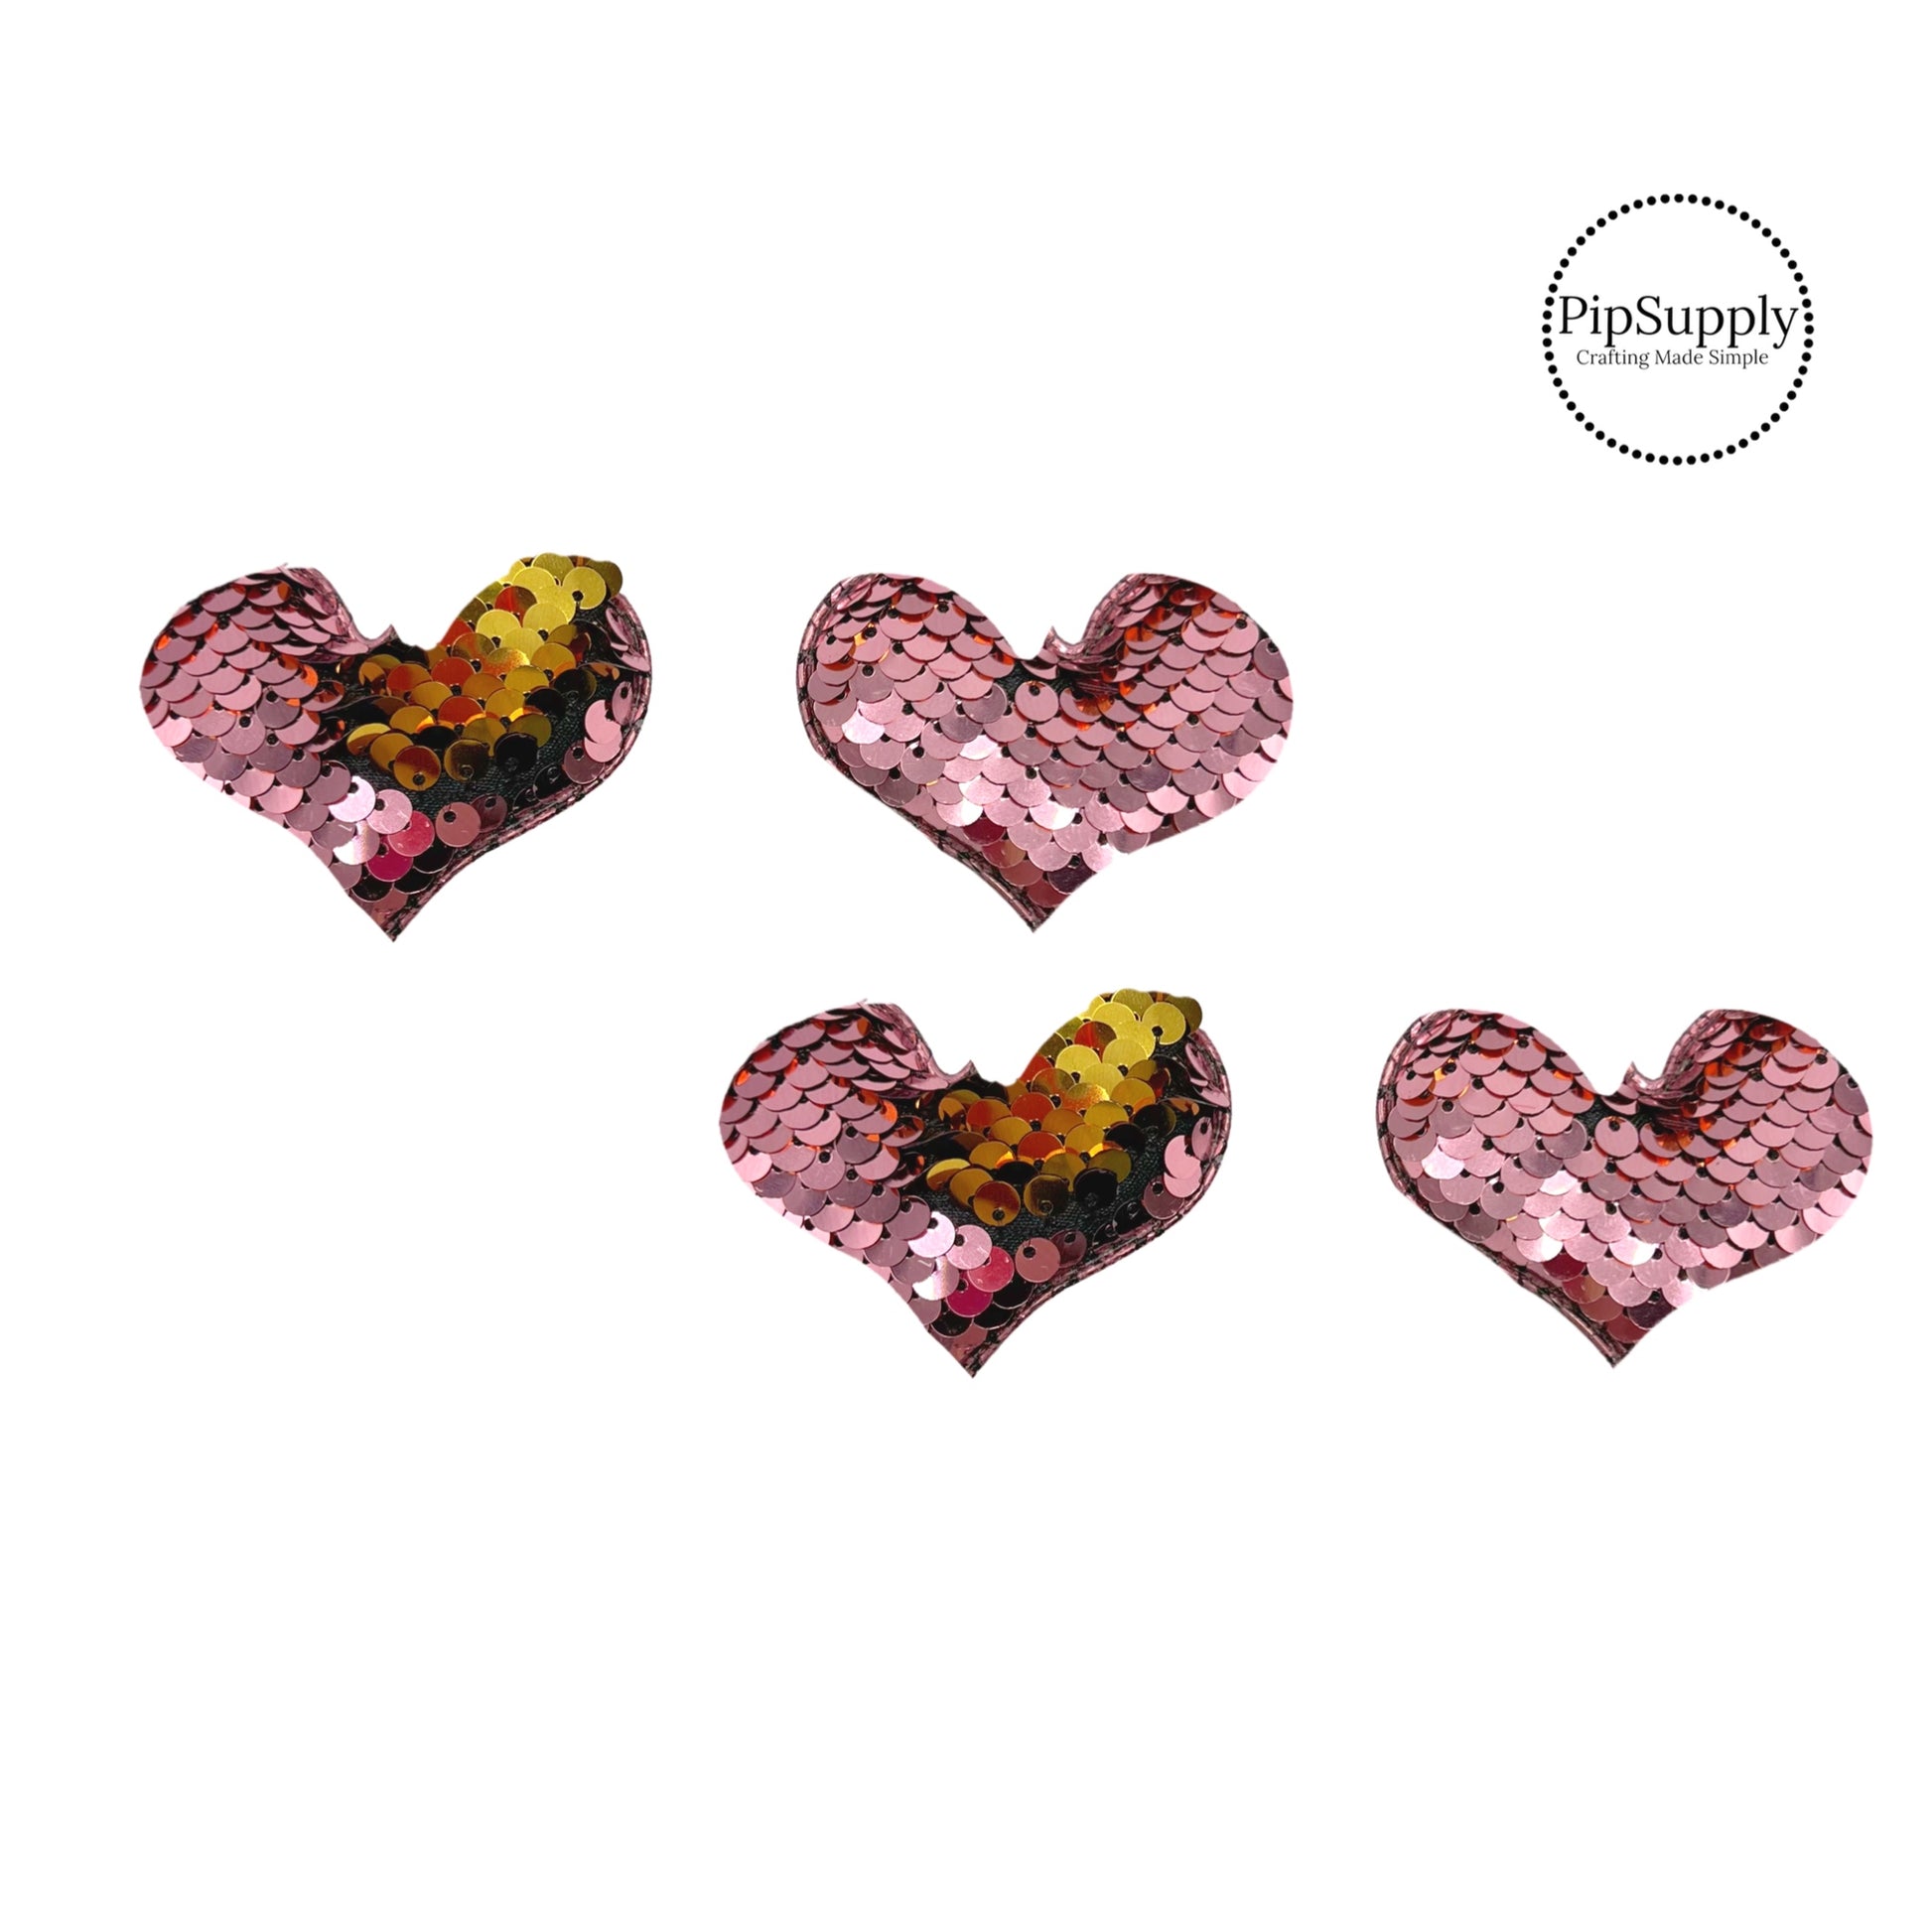 two and a half inch wide gold and light pink reversible sequin heart embellisment